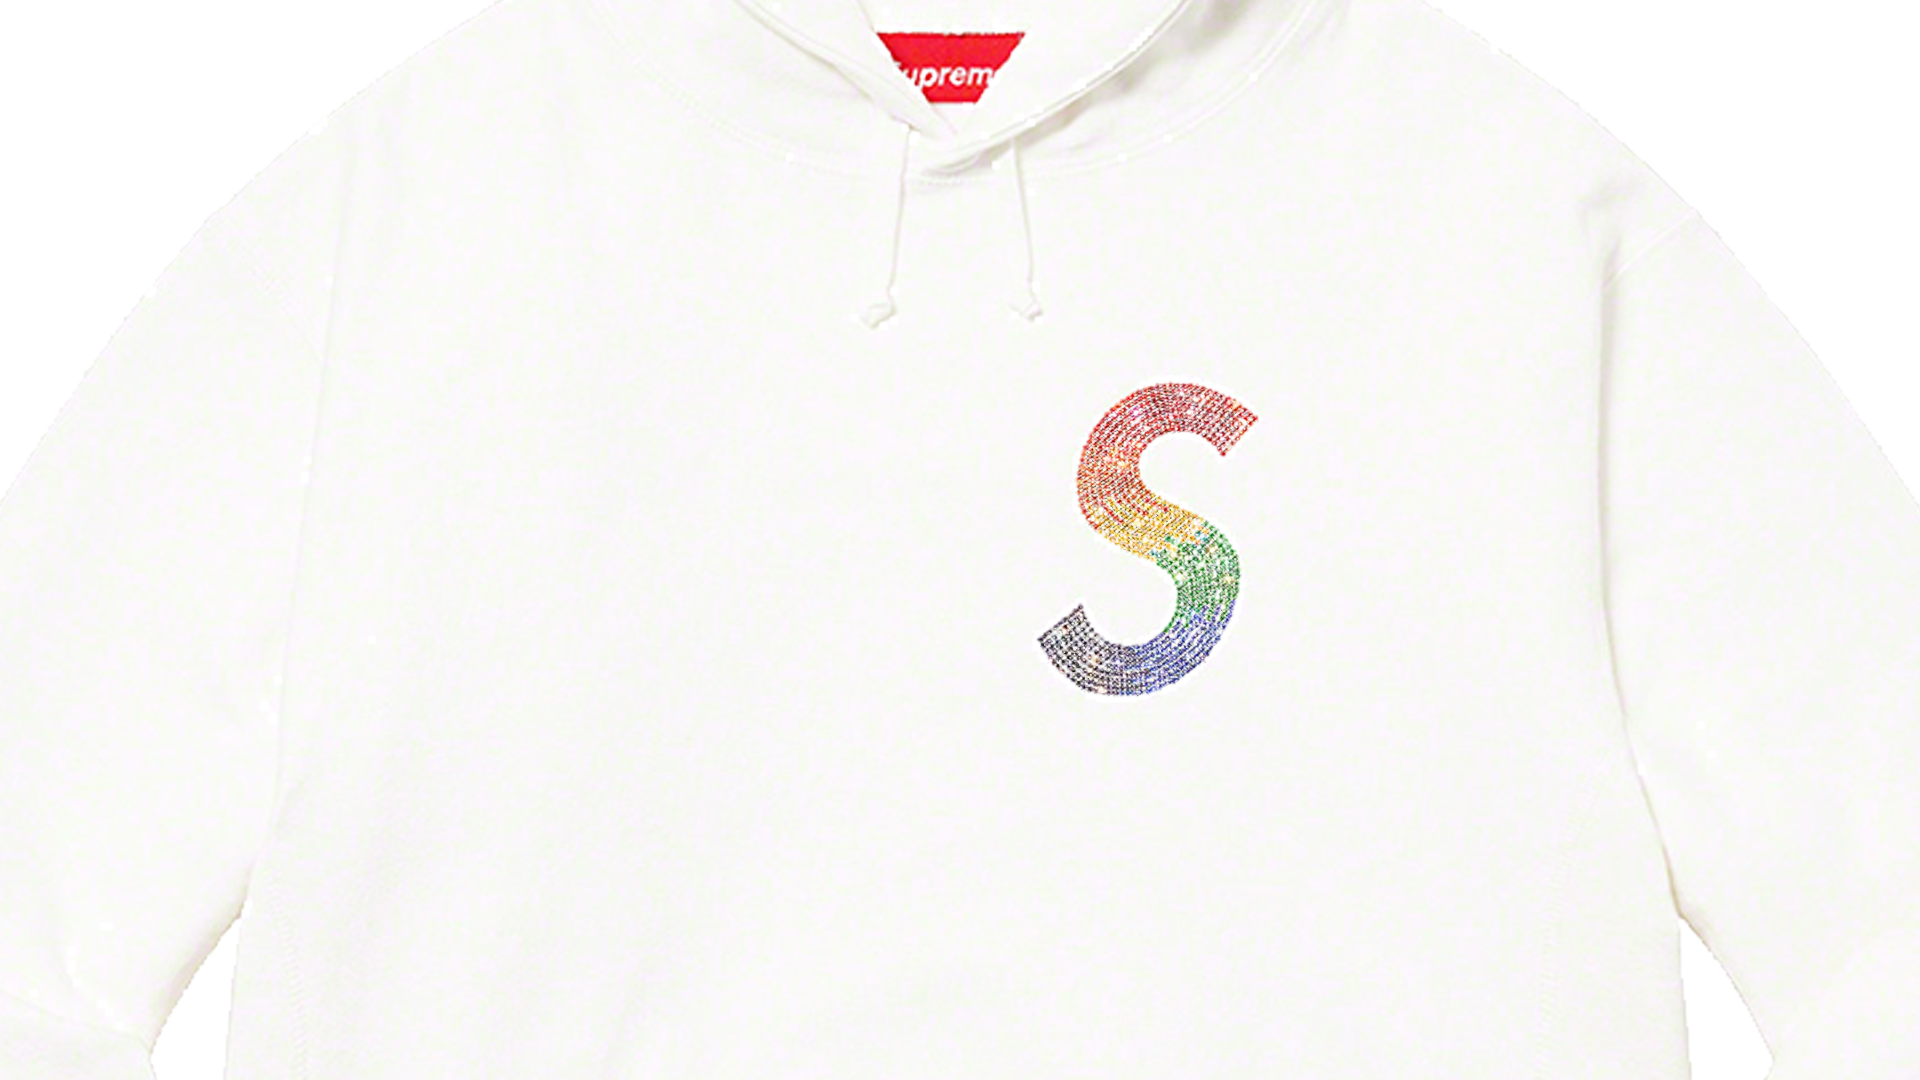 Kaws and Crystals in Supreme's SS21 Sweatshirt Selection - SLN 